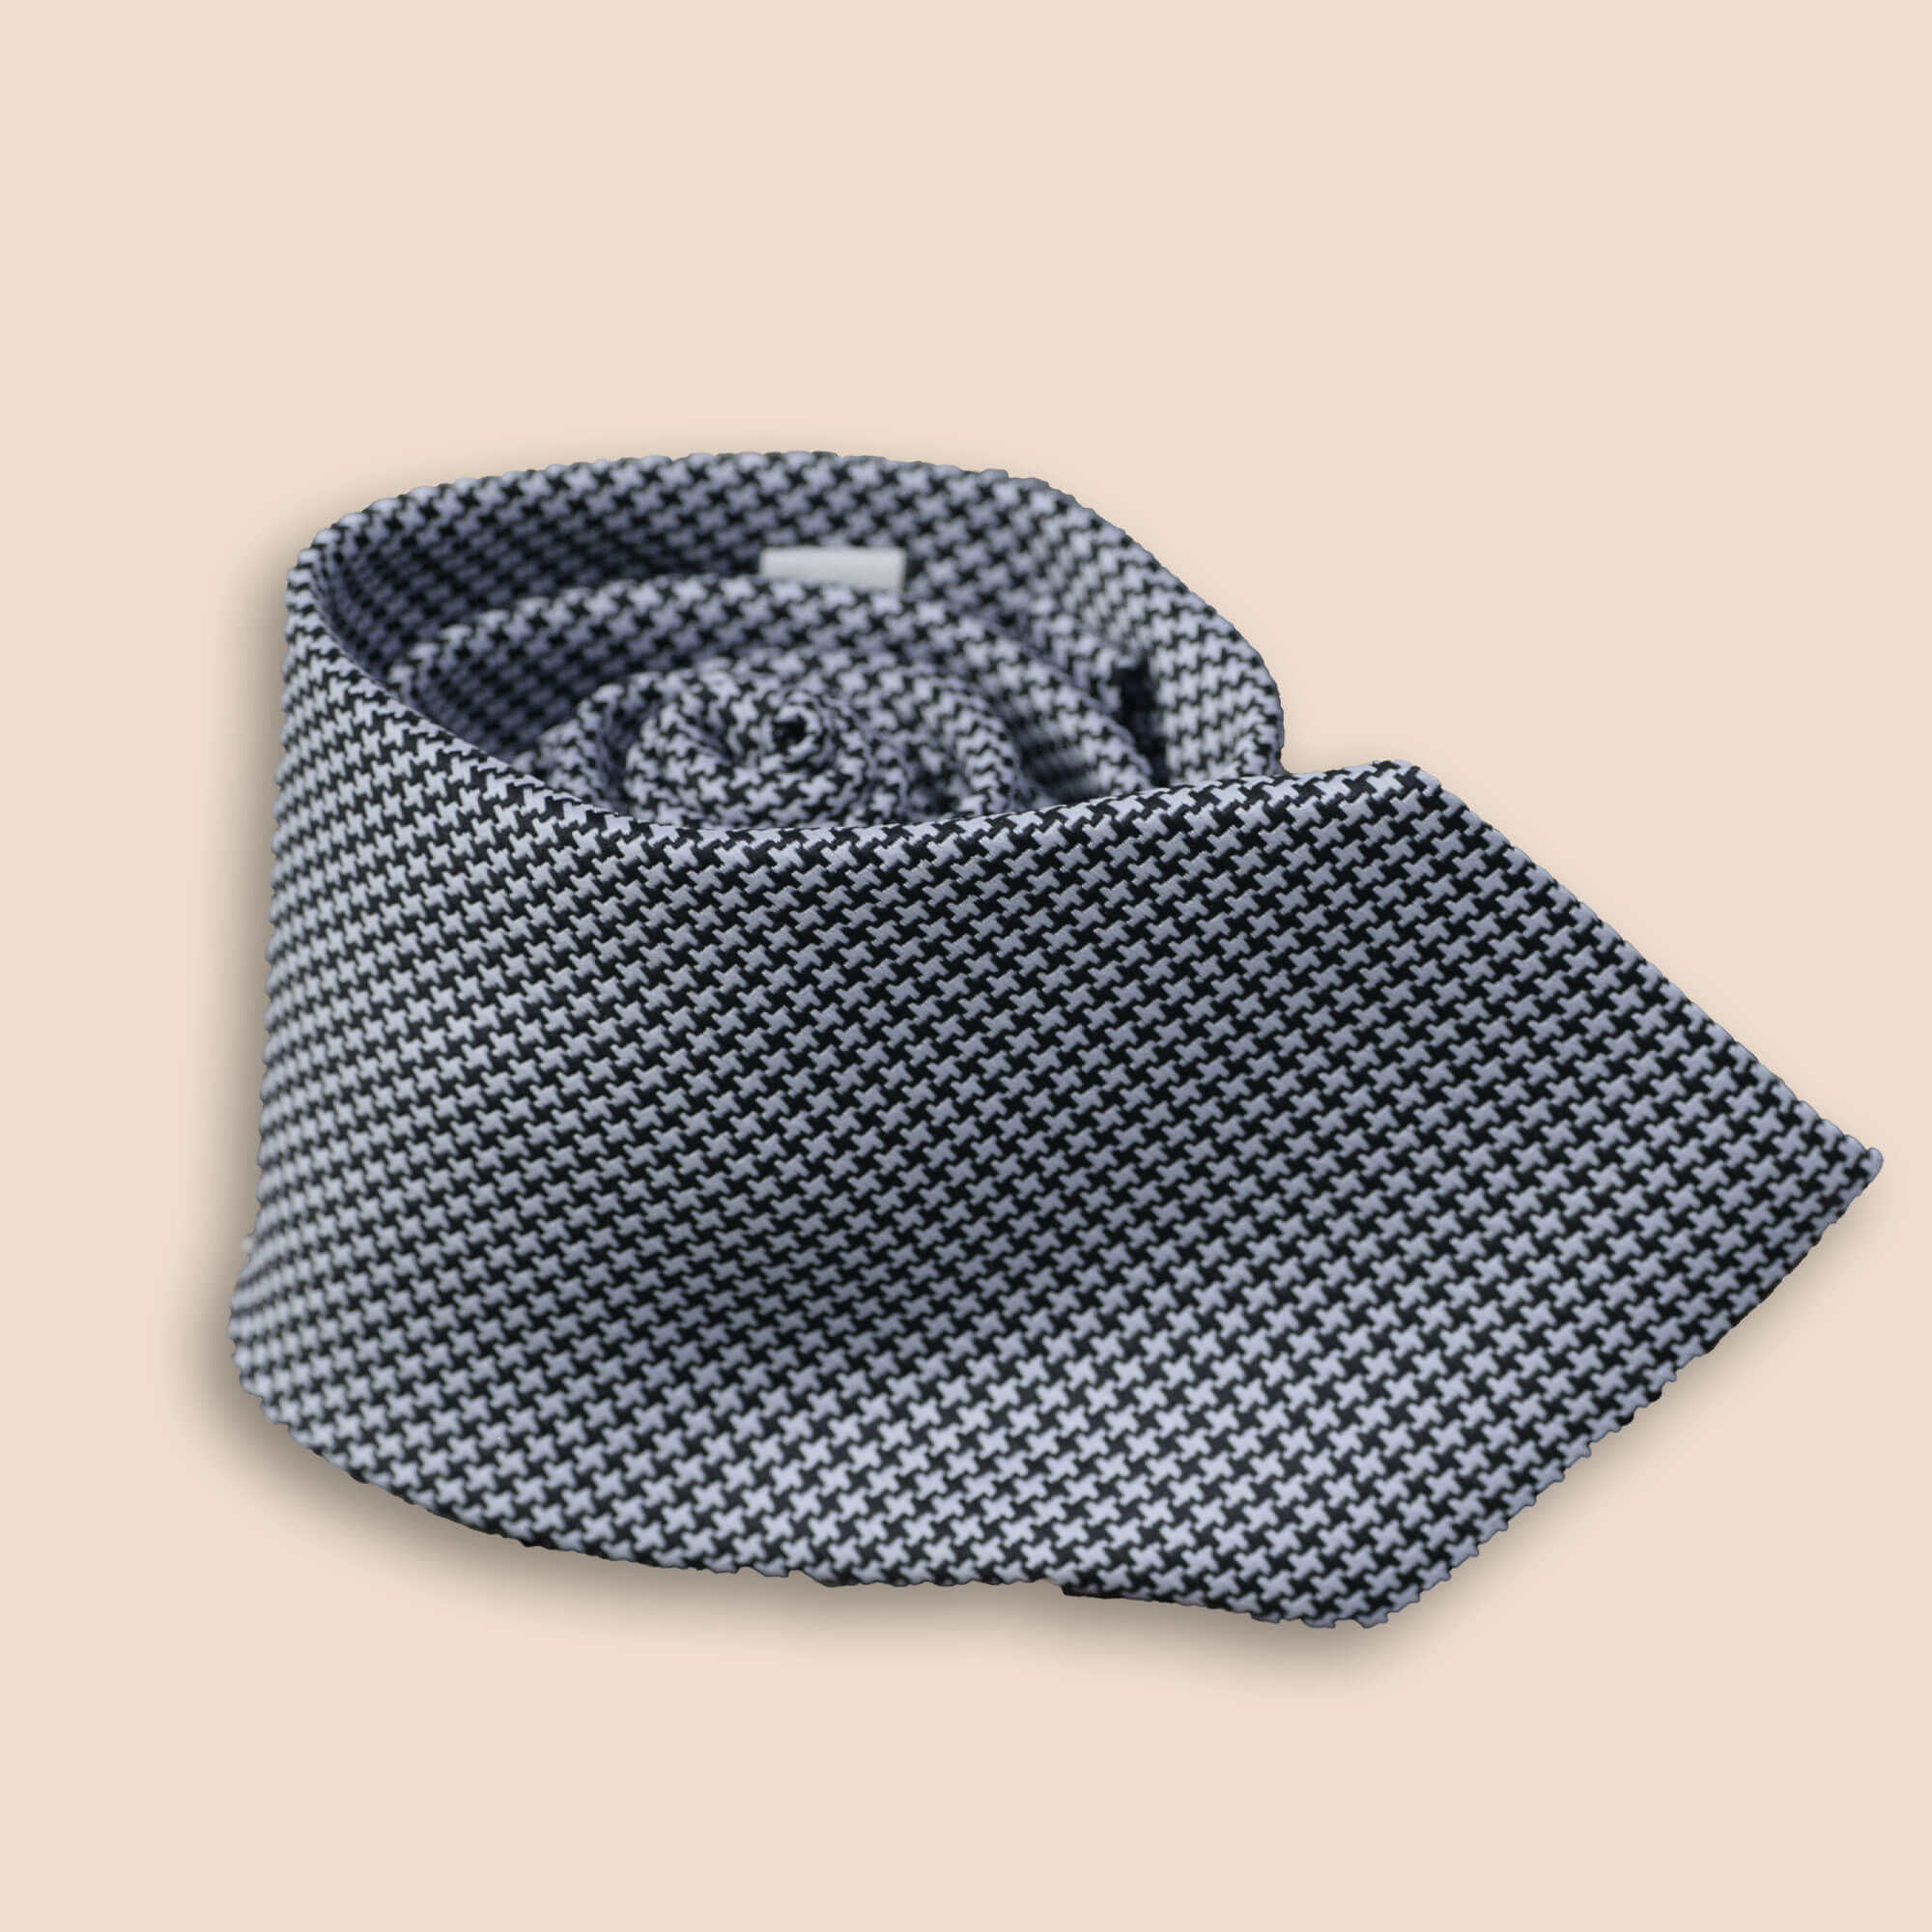 Plover textured handmade tie and pocket square set in Smoky Grey & Black